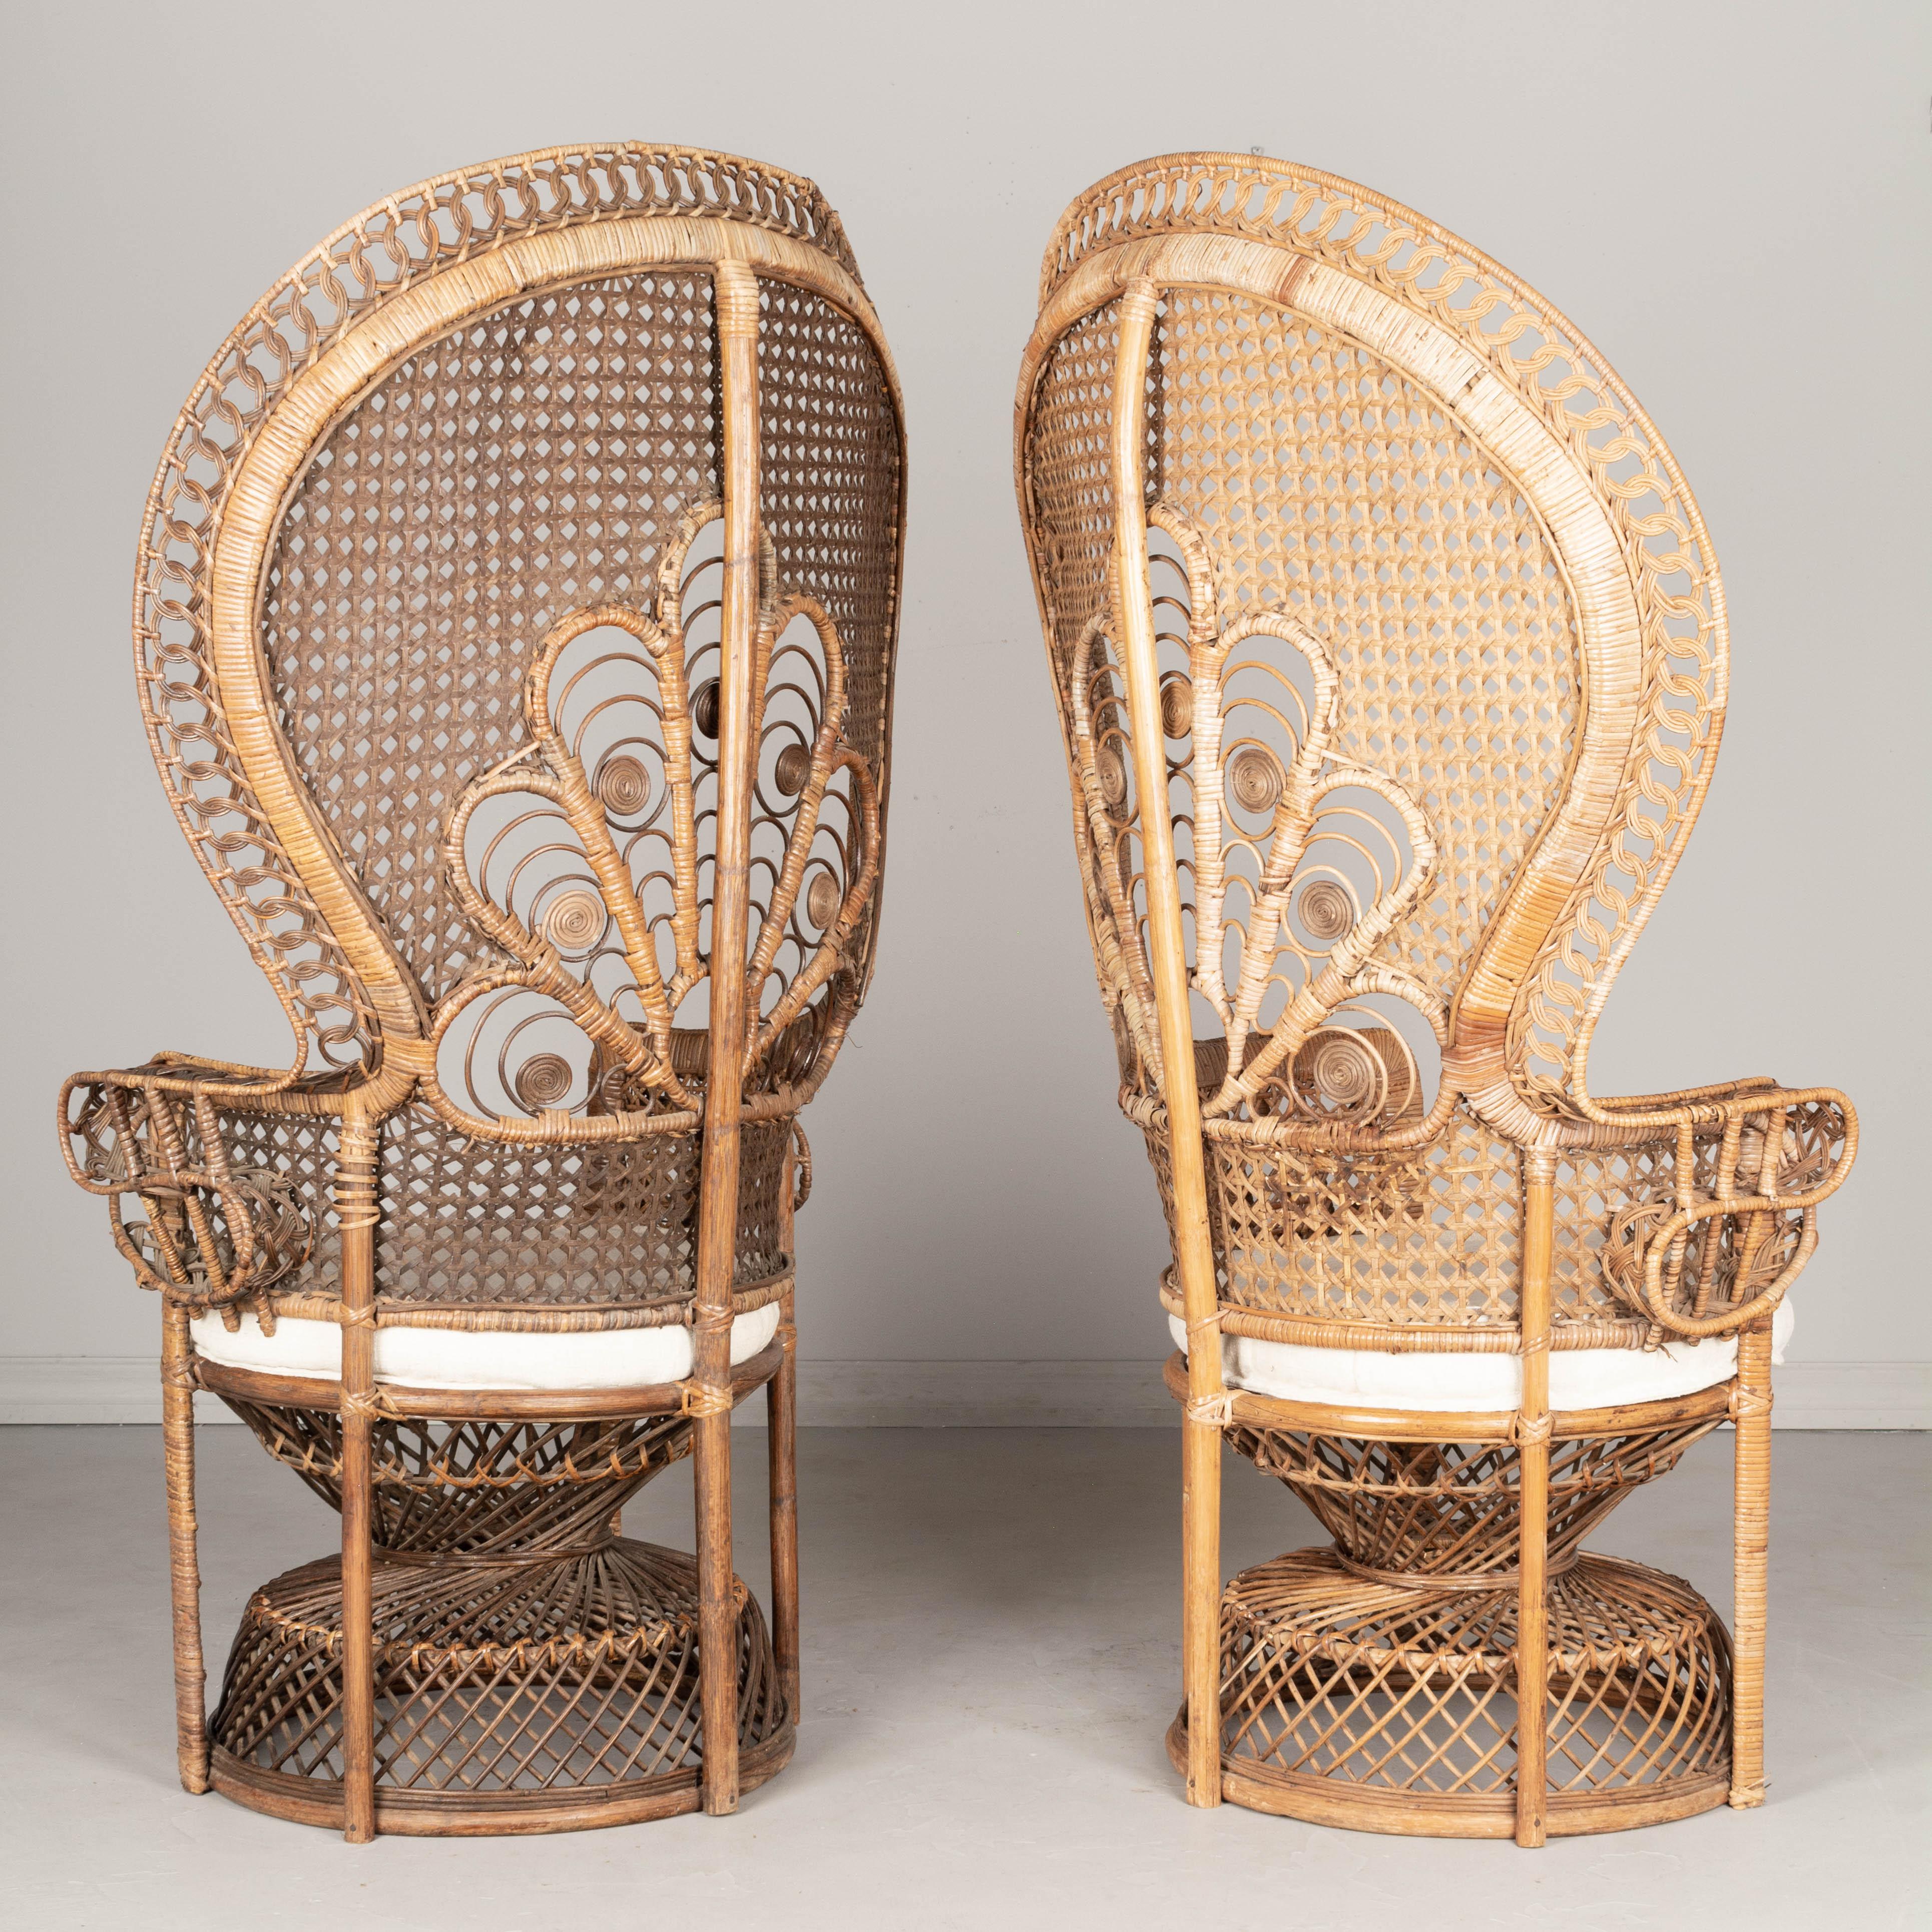 20th Century Vintage French Emmanuelle Rattan Peacock Fan Chairs, a Pair